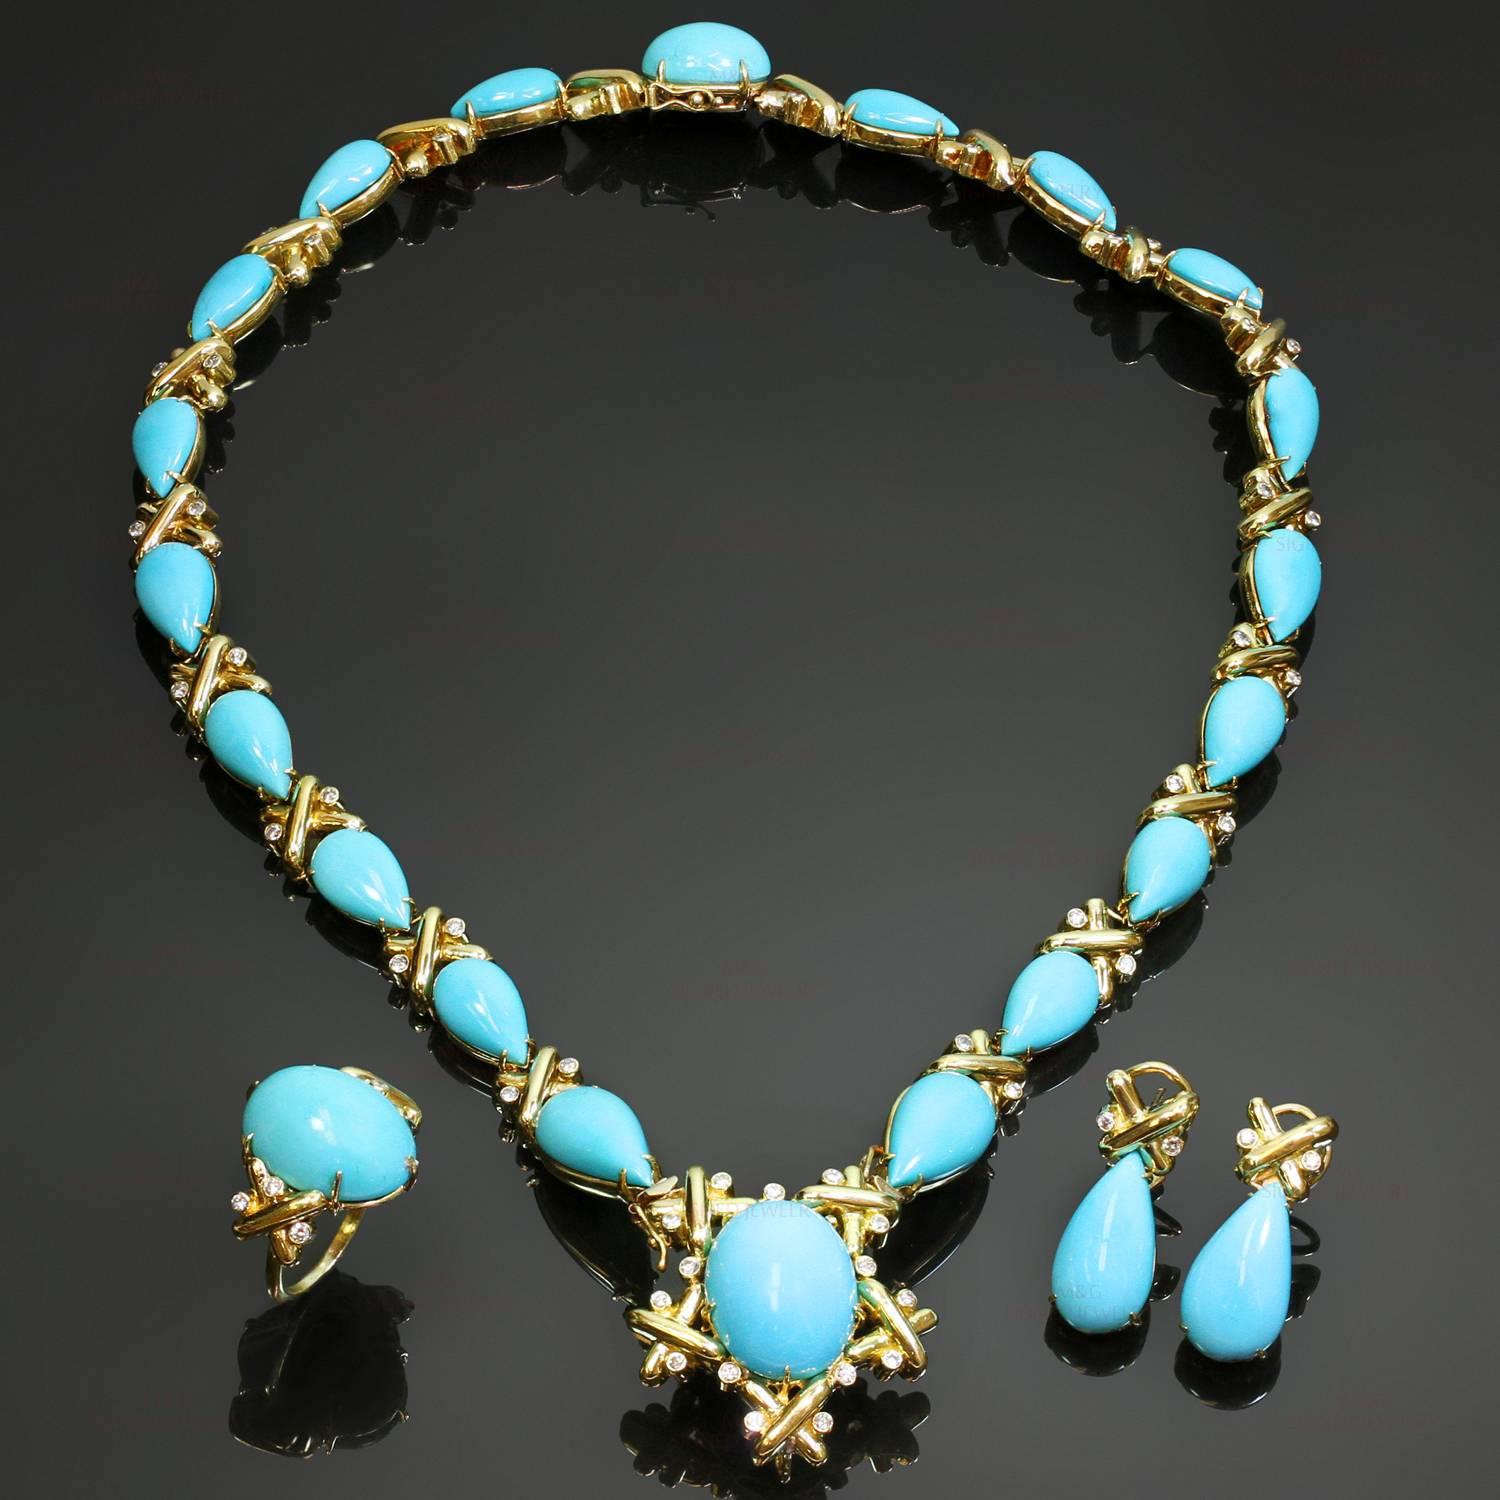 This magnificent vintage jewelry set is crafted in 18k yellow gold and set with a 61 brilliant-cut round diamonds of an estimated 3.75 carats and oval and pear-shaped turquoise stones - bright turquoise blue to slightly greenish blue, light matrix